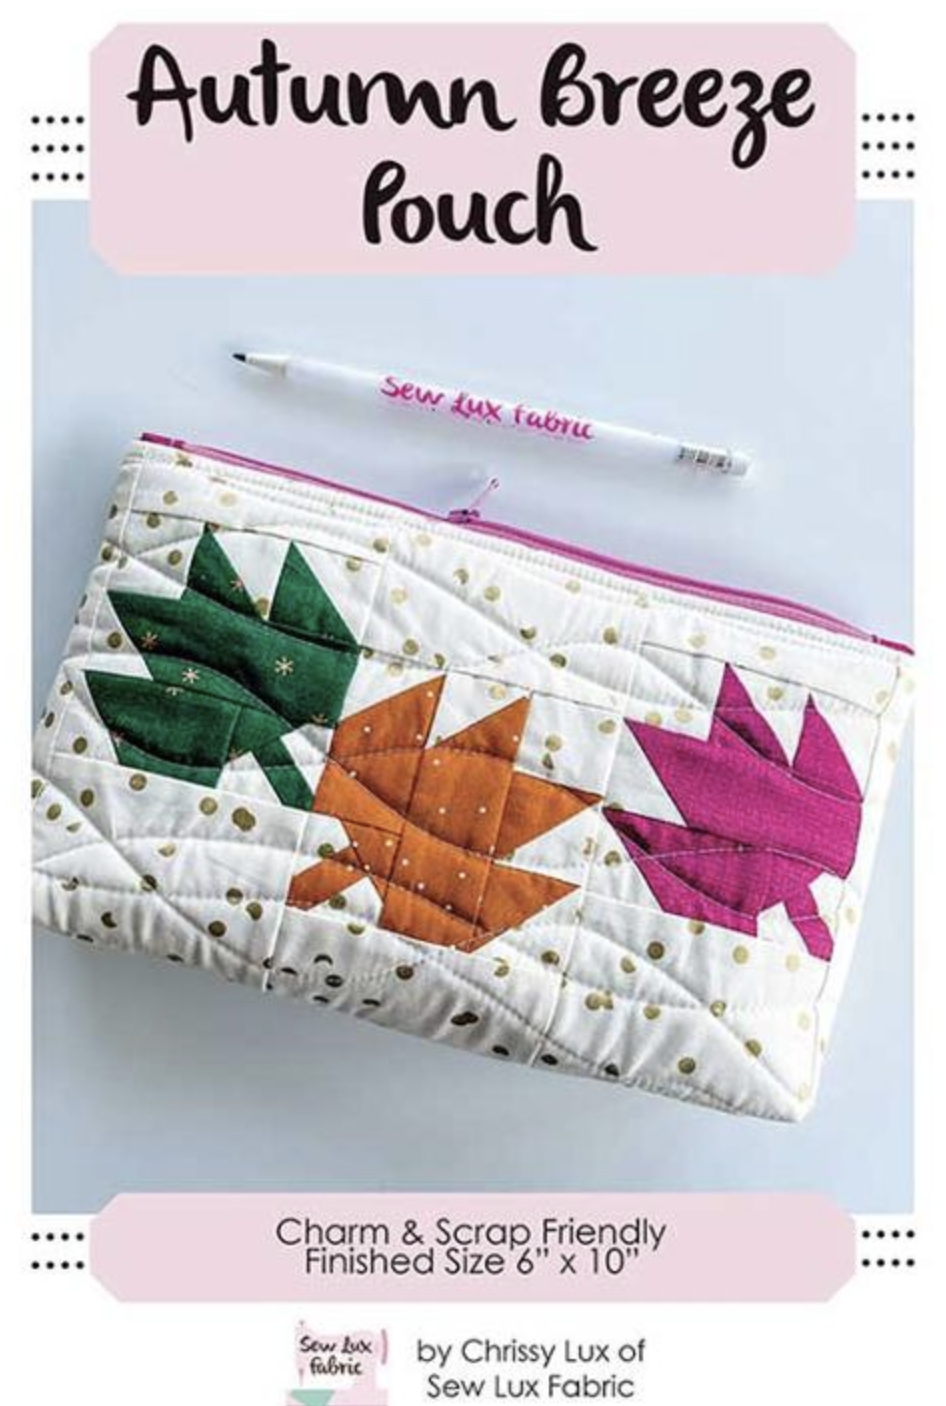 Autumn Breeze Pouch Pattern by Sew Lux Fabric